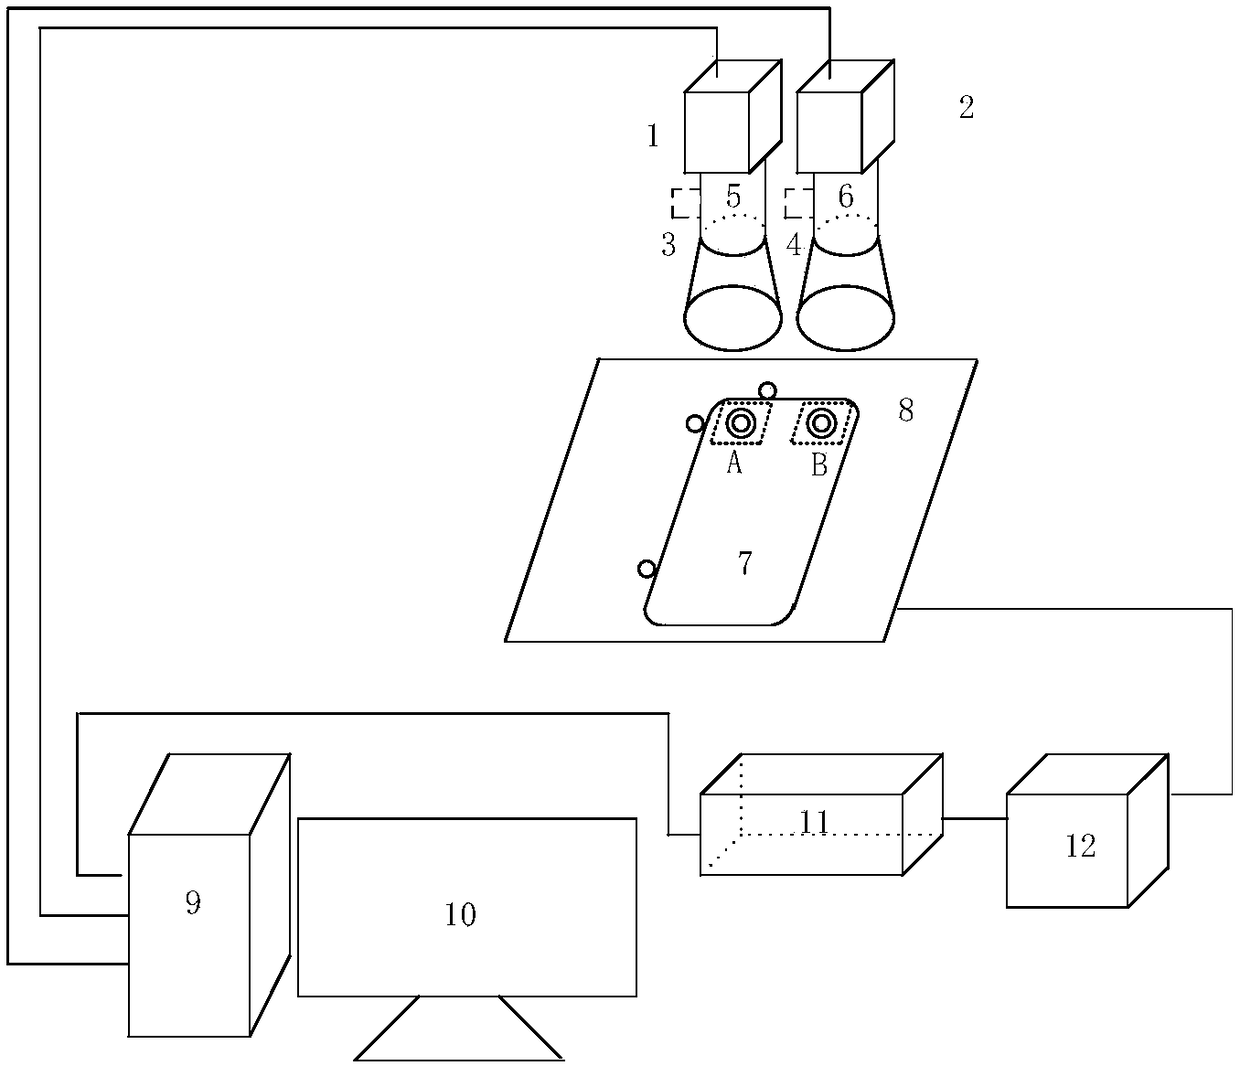 Non-contact visual detection method for Mark positioning of mobile phone touch screen